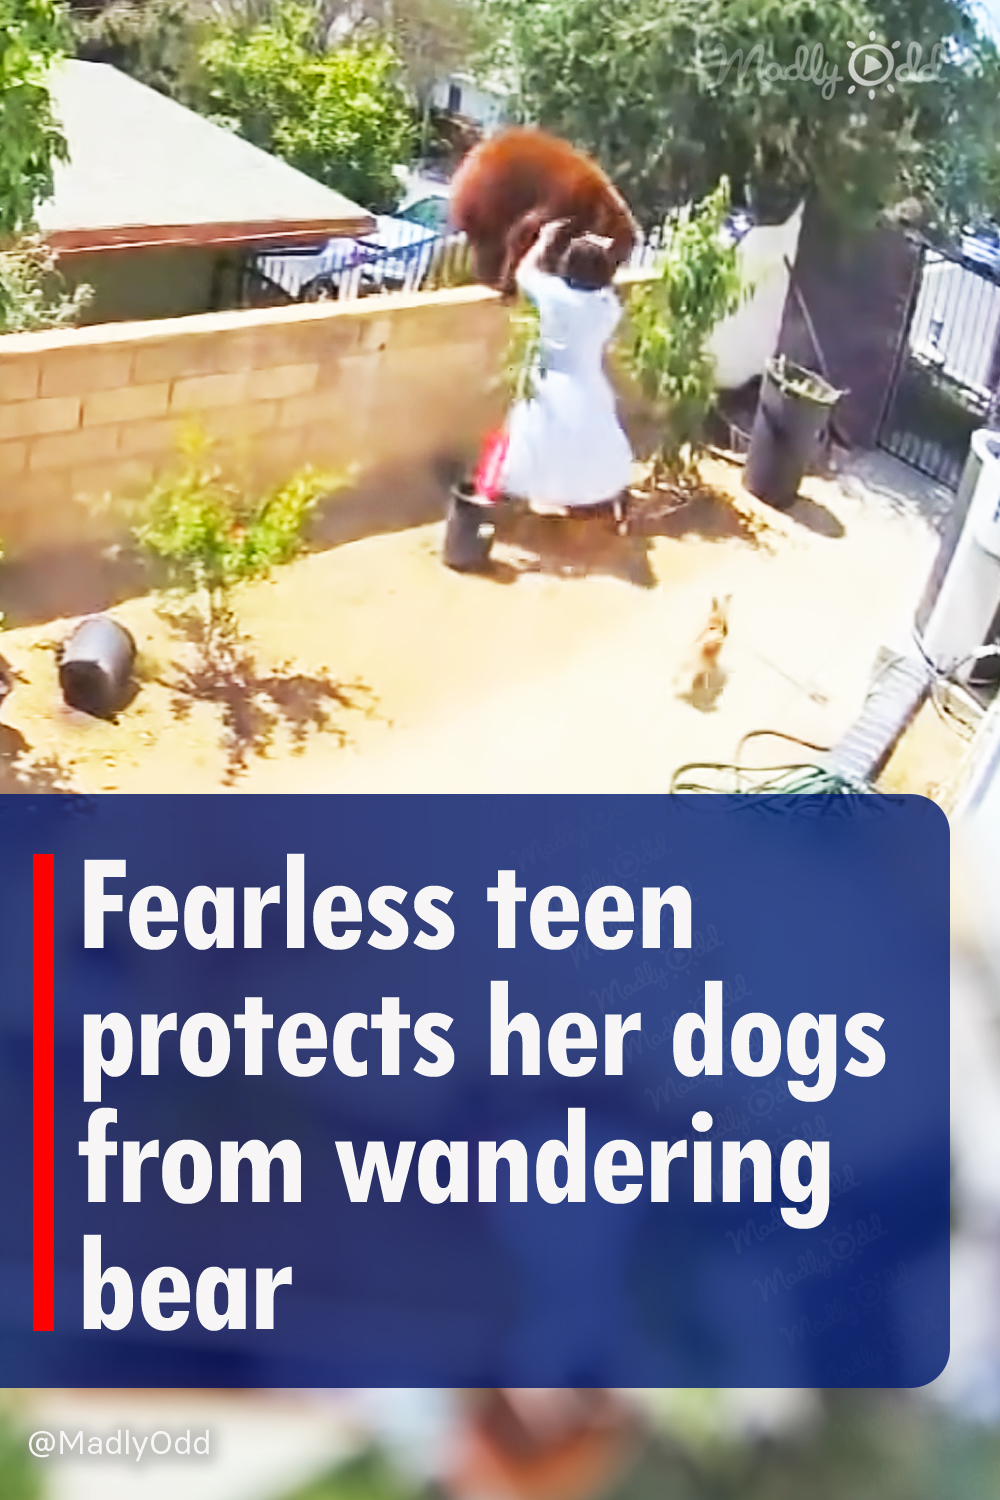 Fearless teen protects her dogs from wandering bear